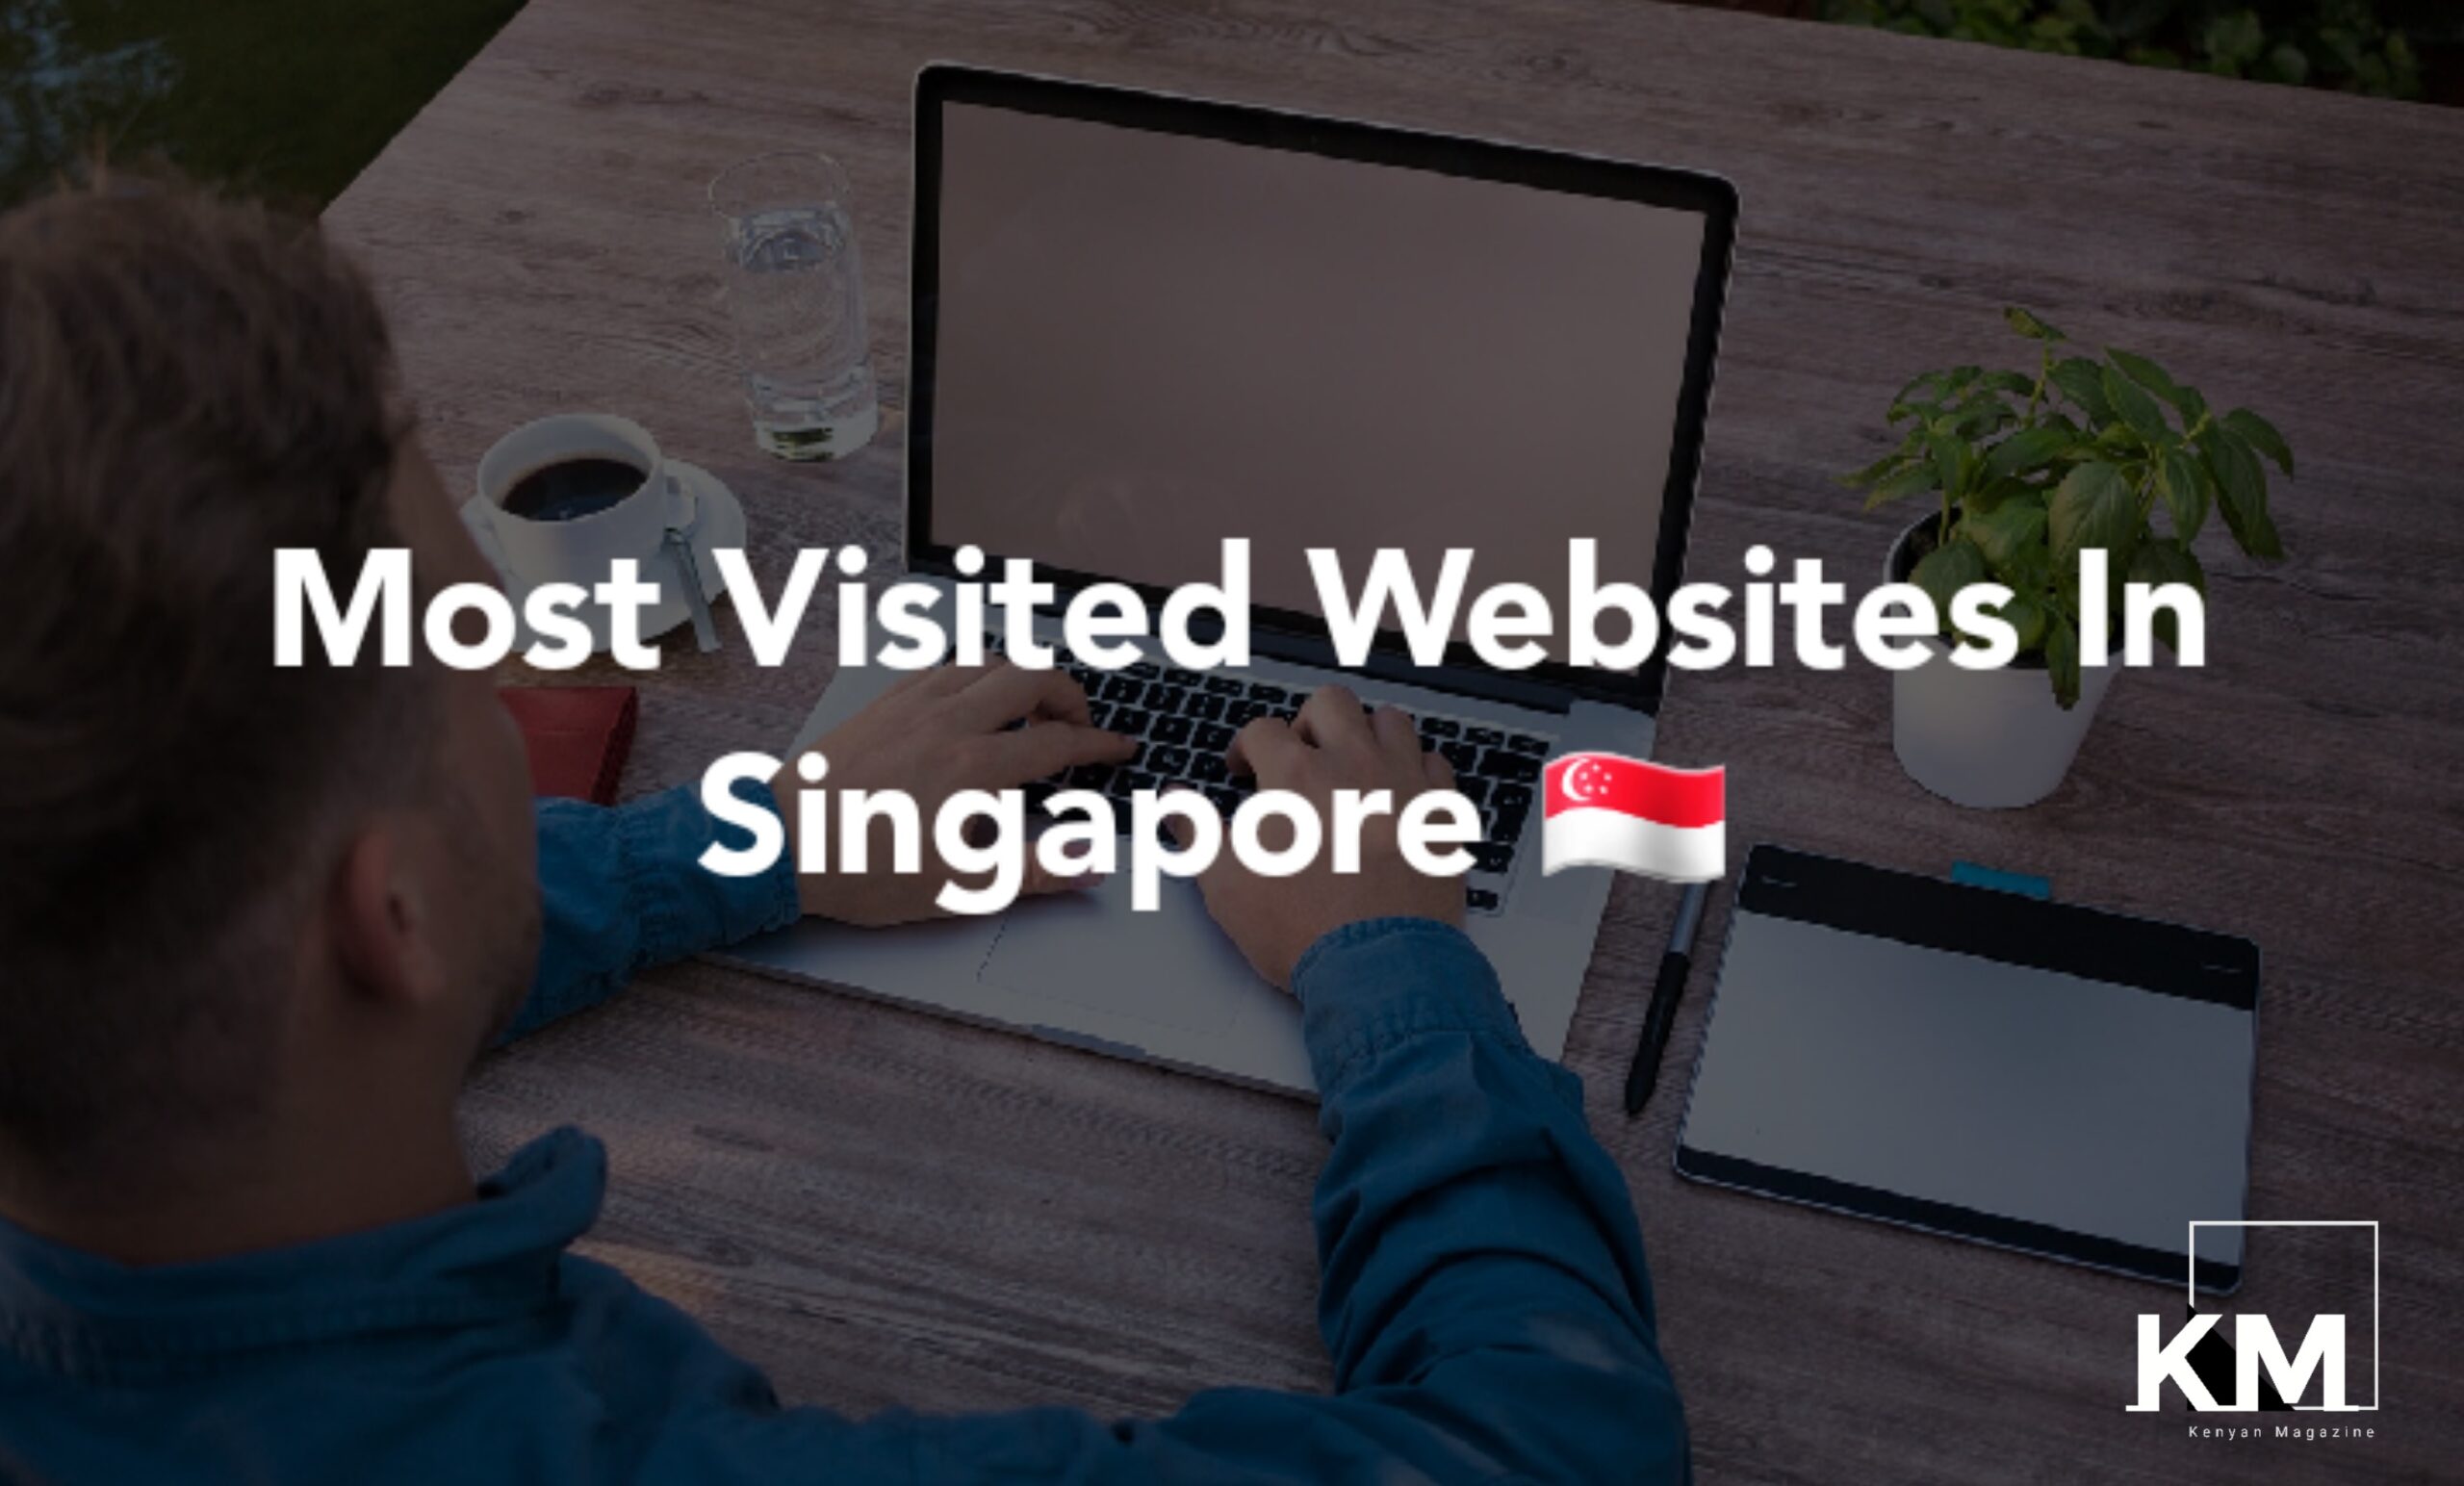 Most visited websites in Singapore